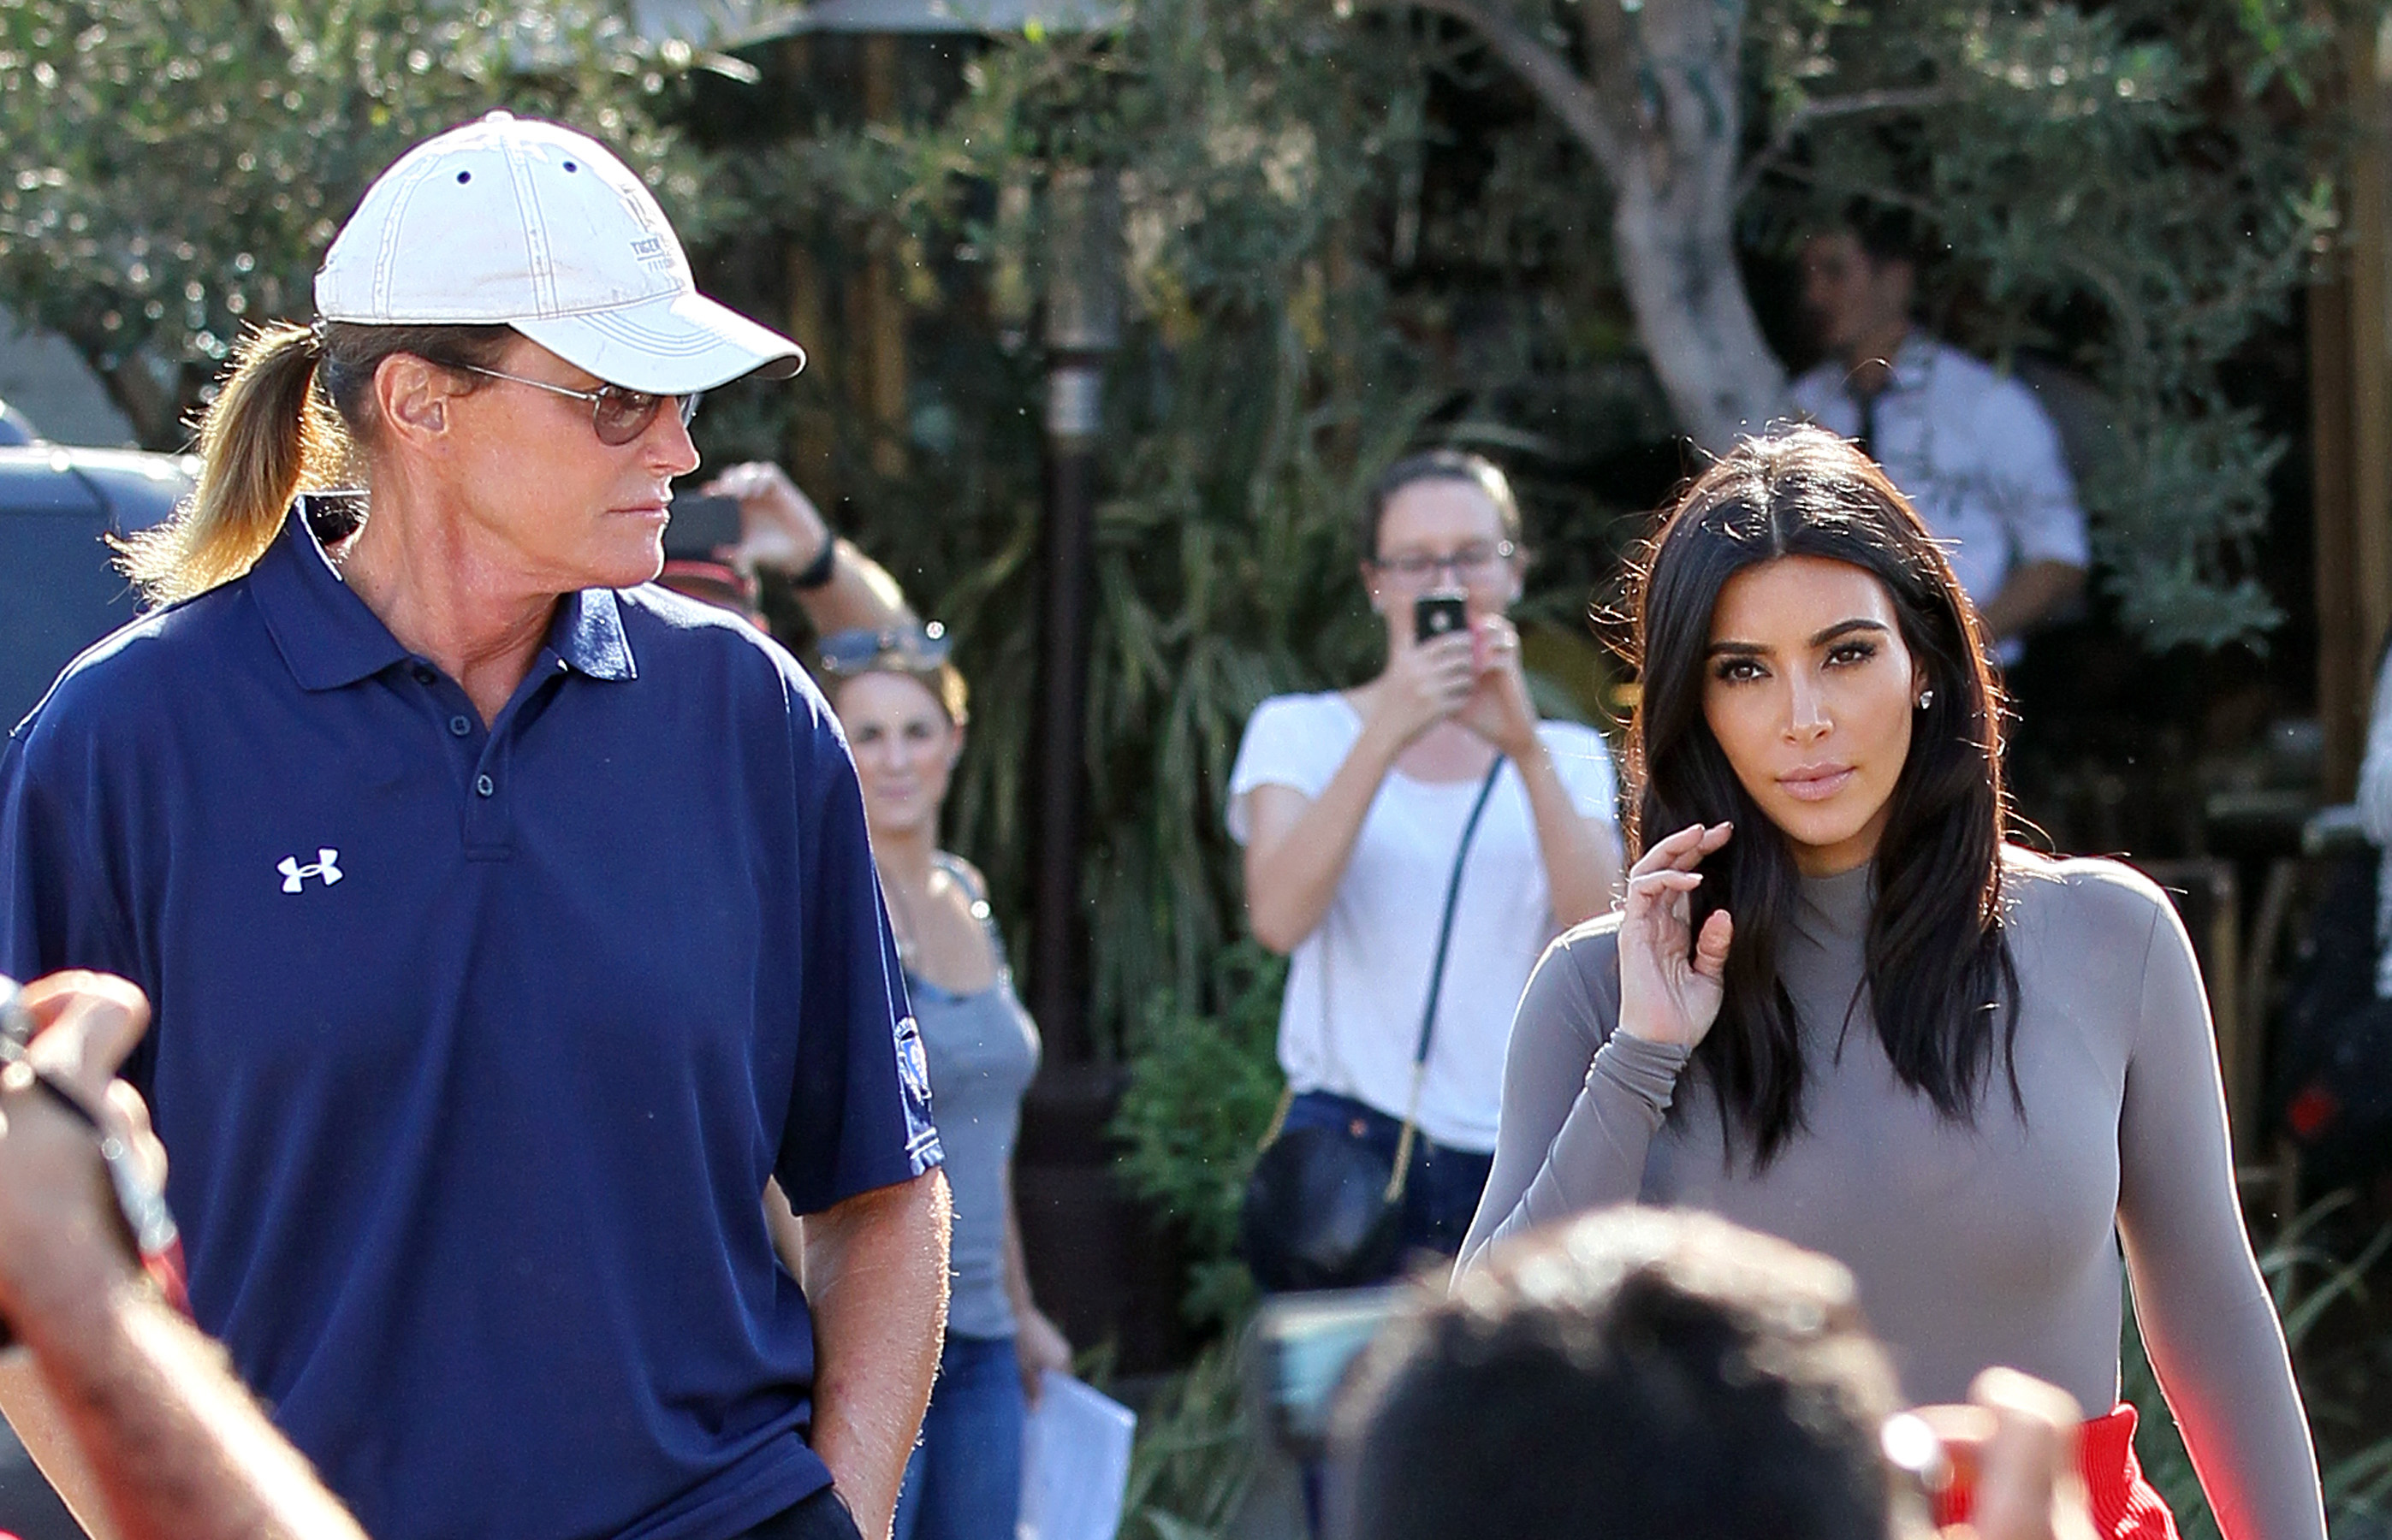 Kim Kardashian and Bruce Jenner are seen filming  their reality show on Oct. 20, 2014 in Los Angeles. (JB Lacroix—GC Images/Getty Images)